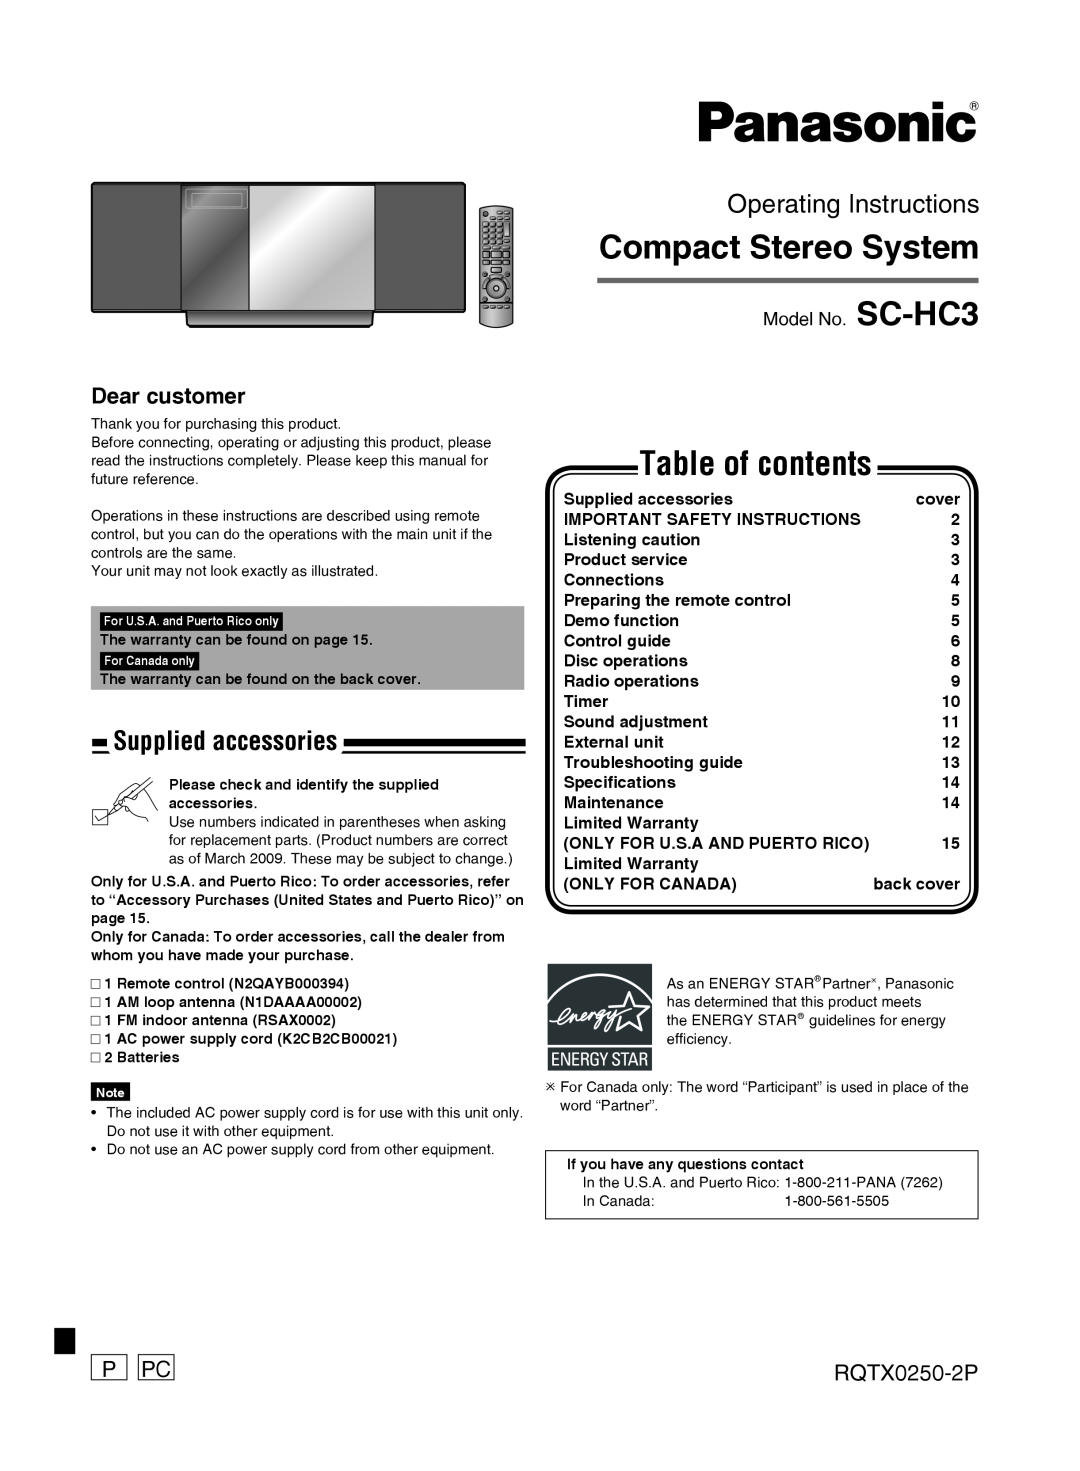 Panasonic operating instructions Supplied accessories, P Pc, RQTX0250-2P, Model No. SC-HC3, Compact Stereo System 